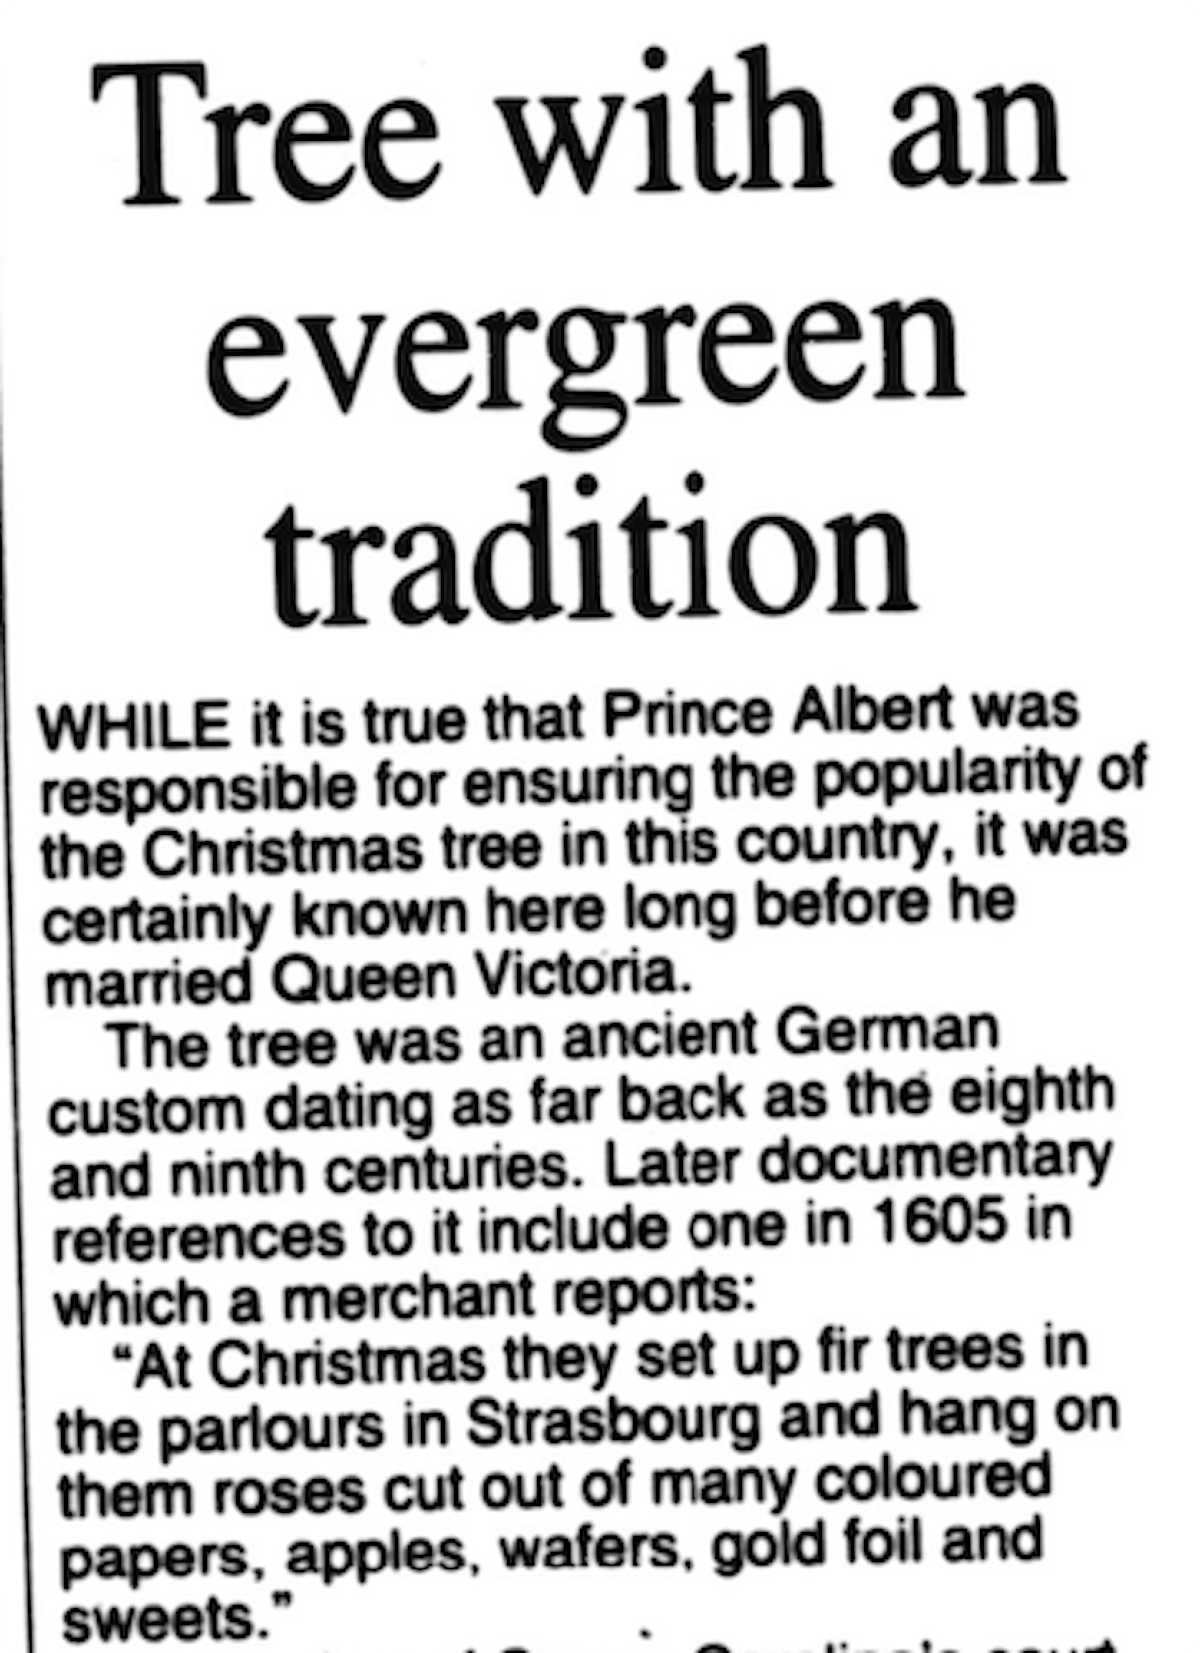 'Tree with an evergreen tradition', Suffolk Free Press, 1998.